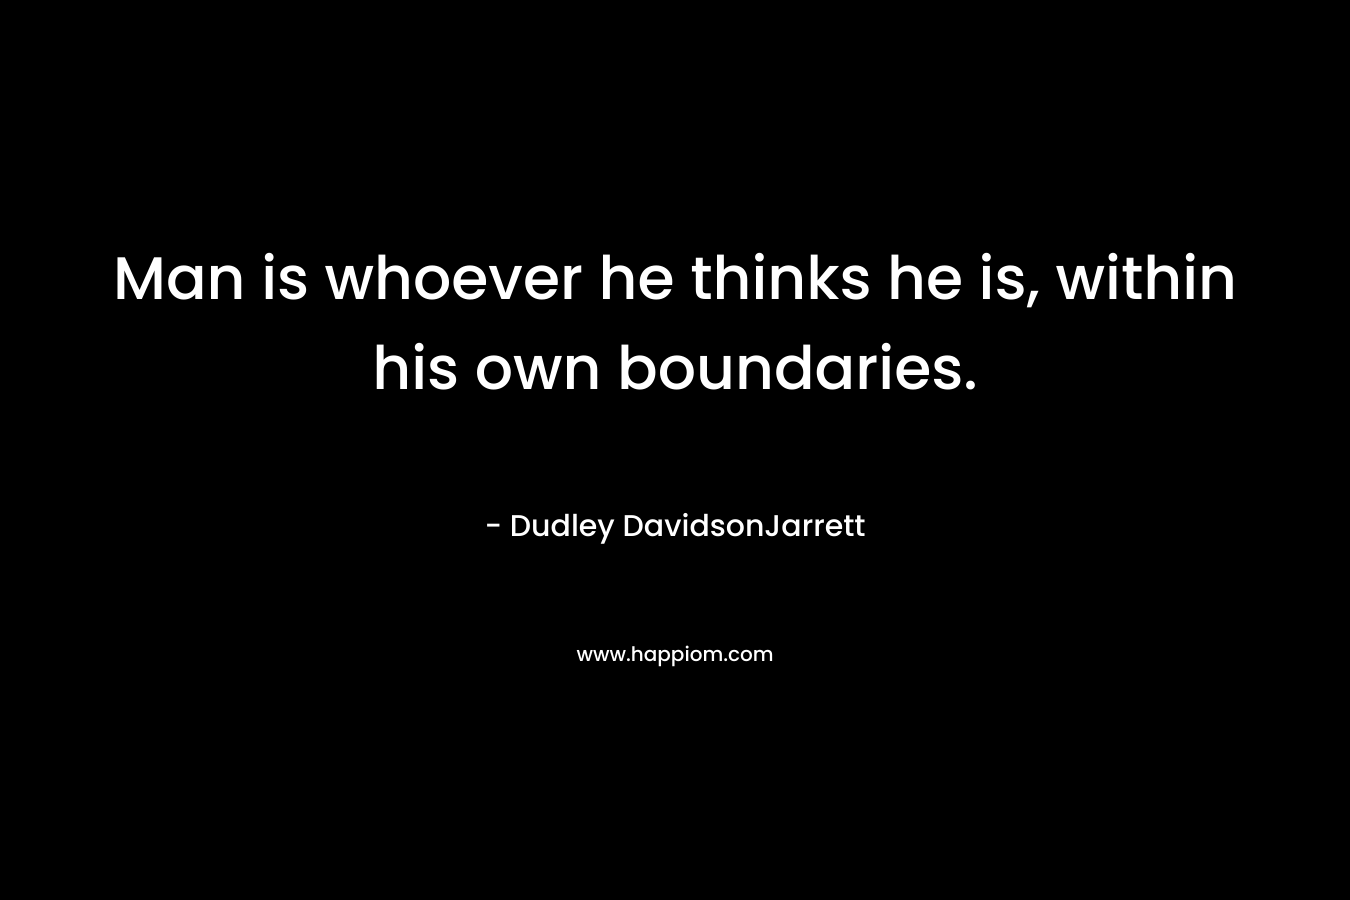 Man is whoever he thinks he is, within his own boundaries.